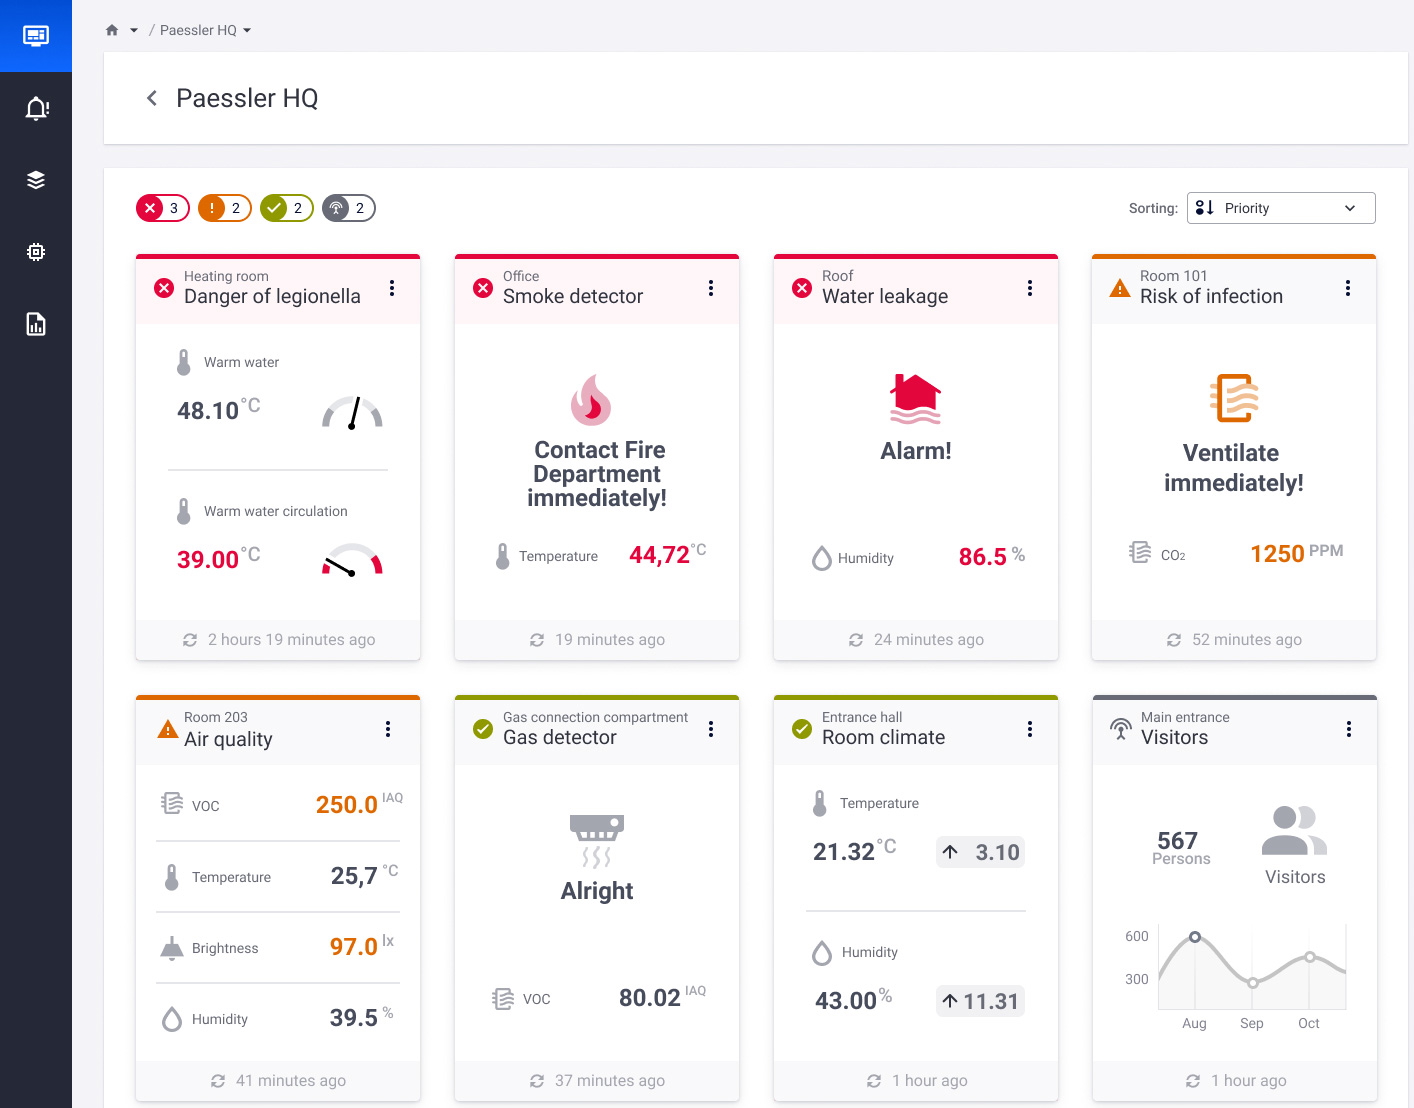 Dashboard with insights into building monitoring